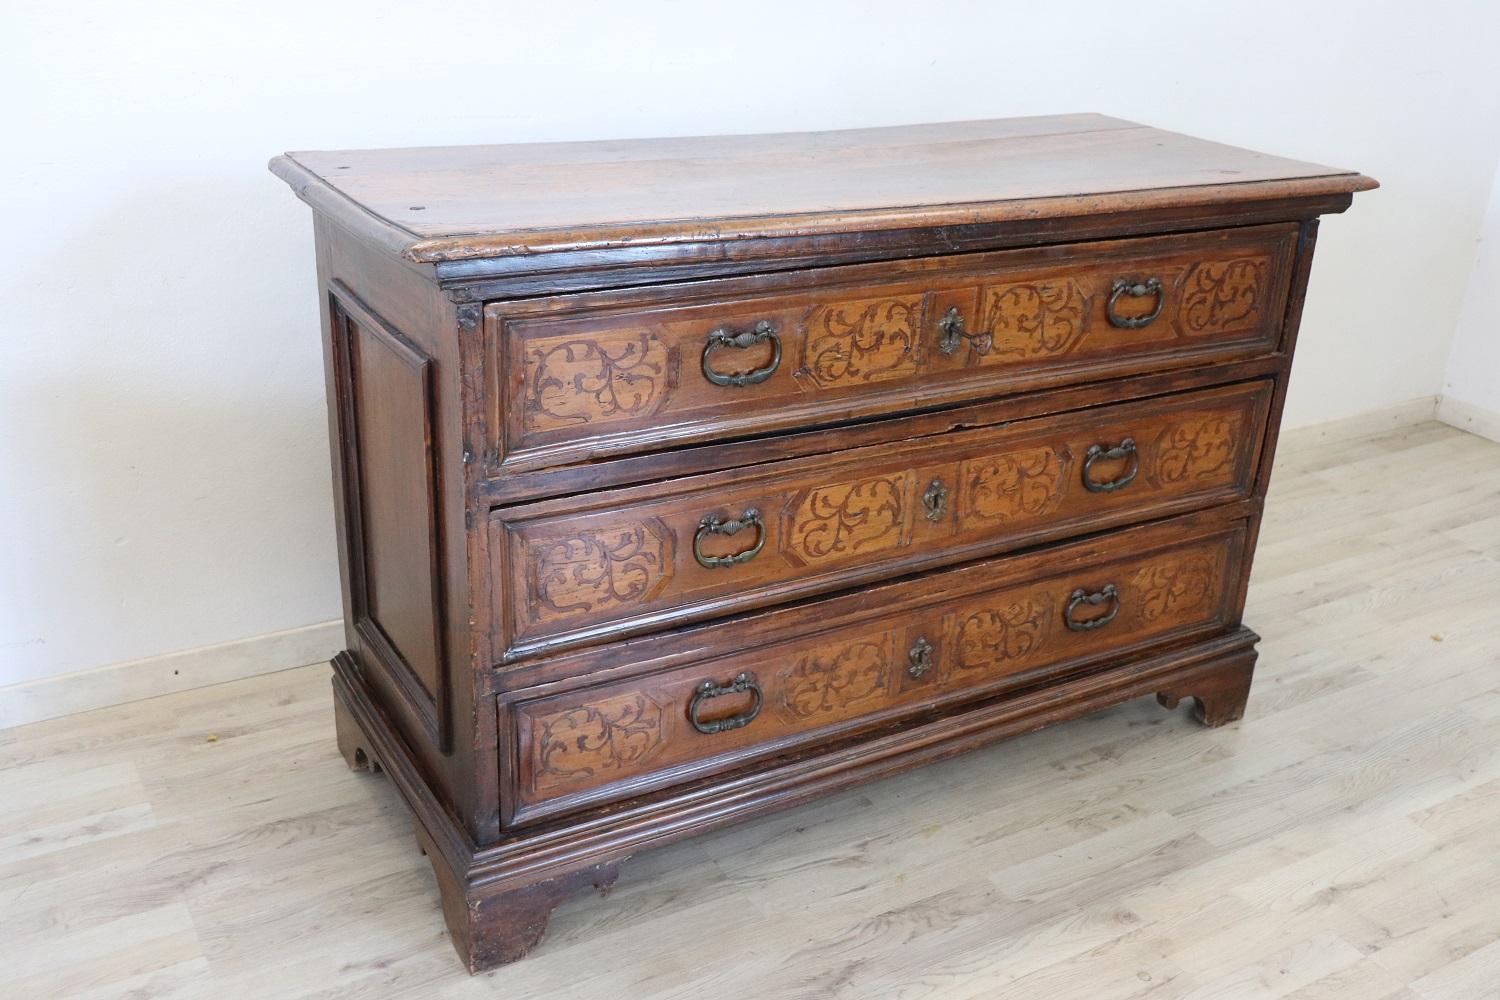 Important antique Italian Louis XIV period chest of drawers 1680s walnut wood. Rafined Inlaid decoration on the front. On the front the drawers are inlay wood with small pieces of different precious woods. On the front three large and useful